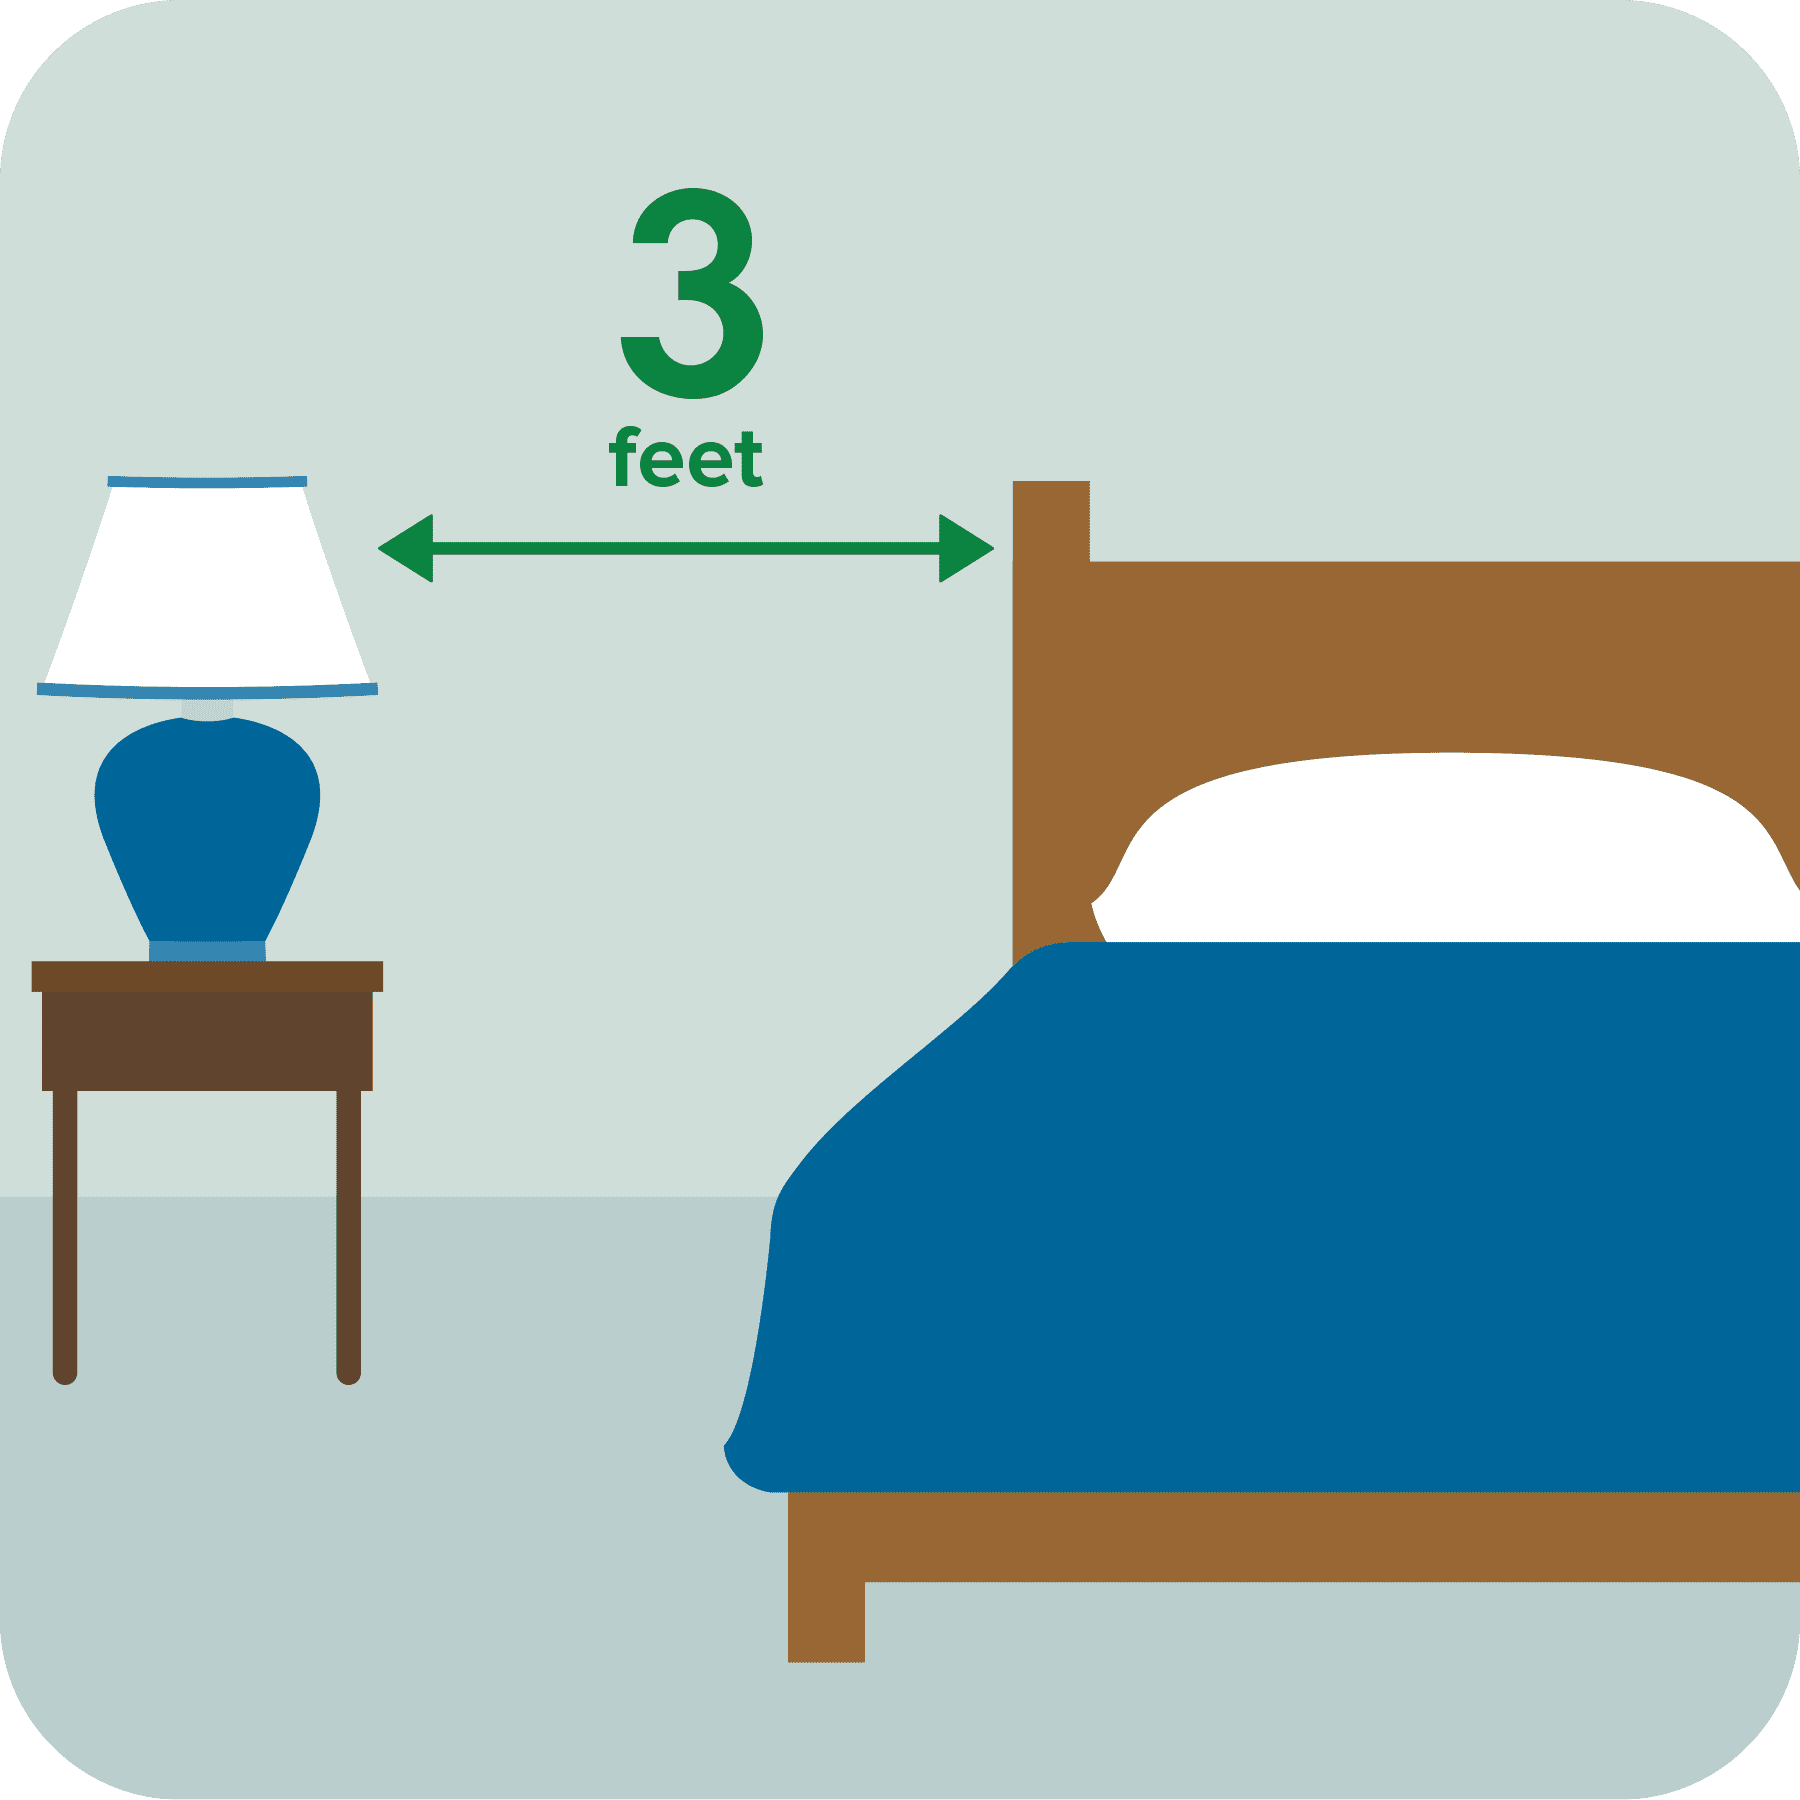 A light is shown 3-feet away from a bed.